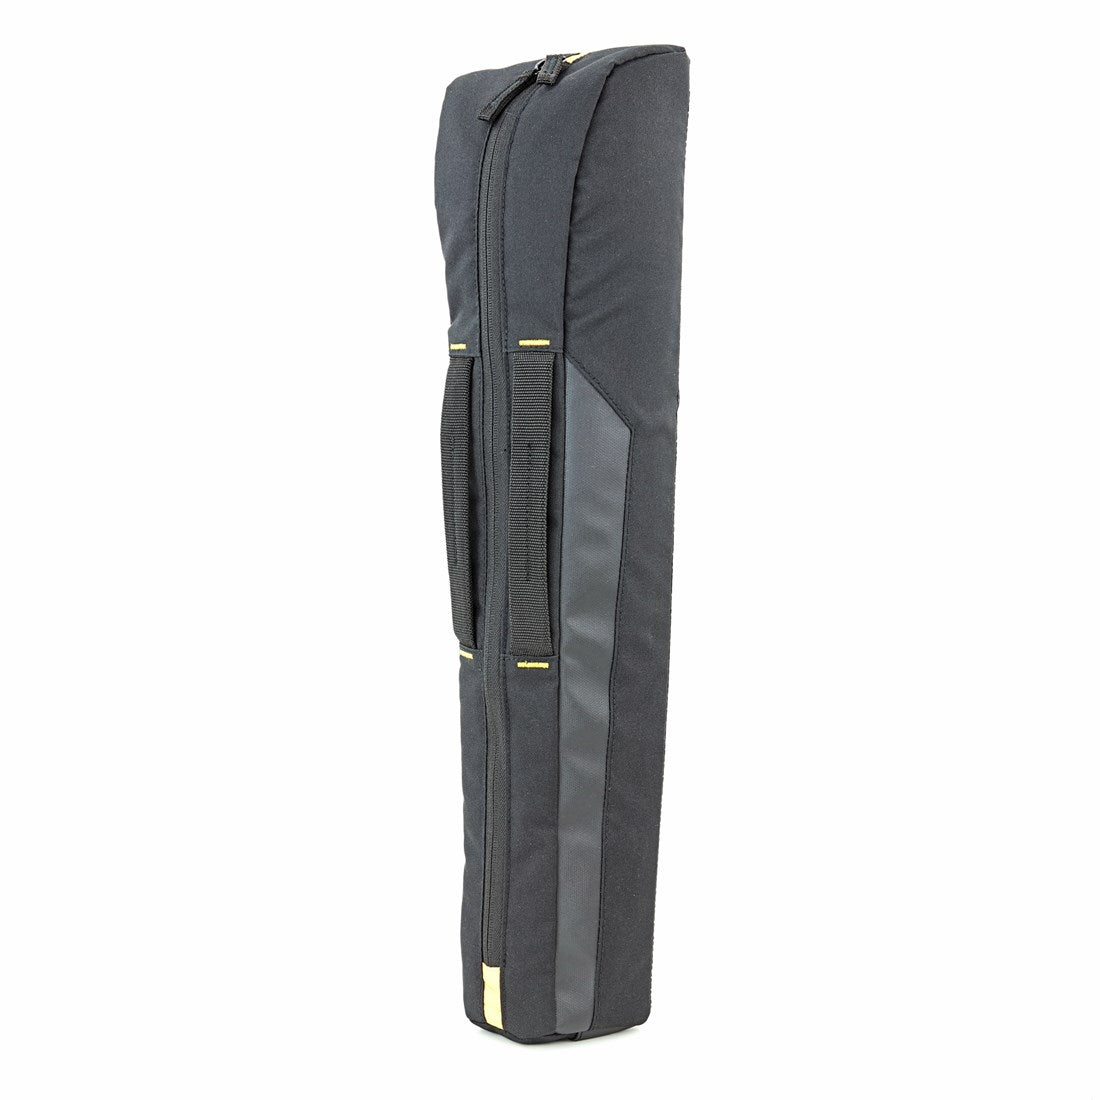 Product Image of Vanguard Alta Action 60 Tripod Carry bag